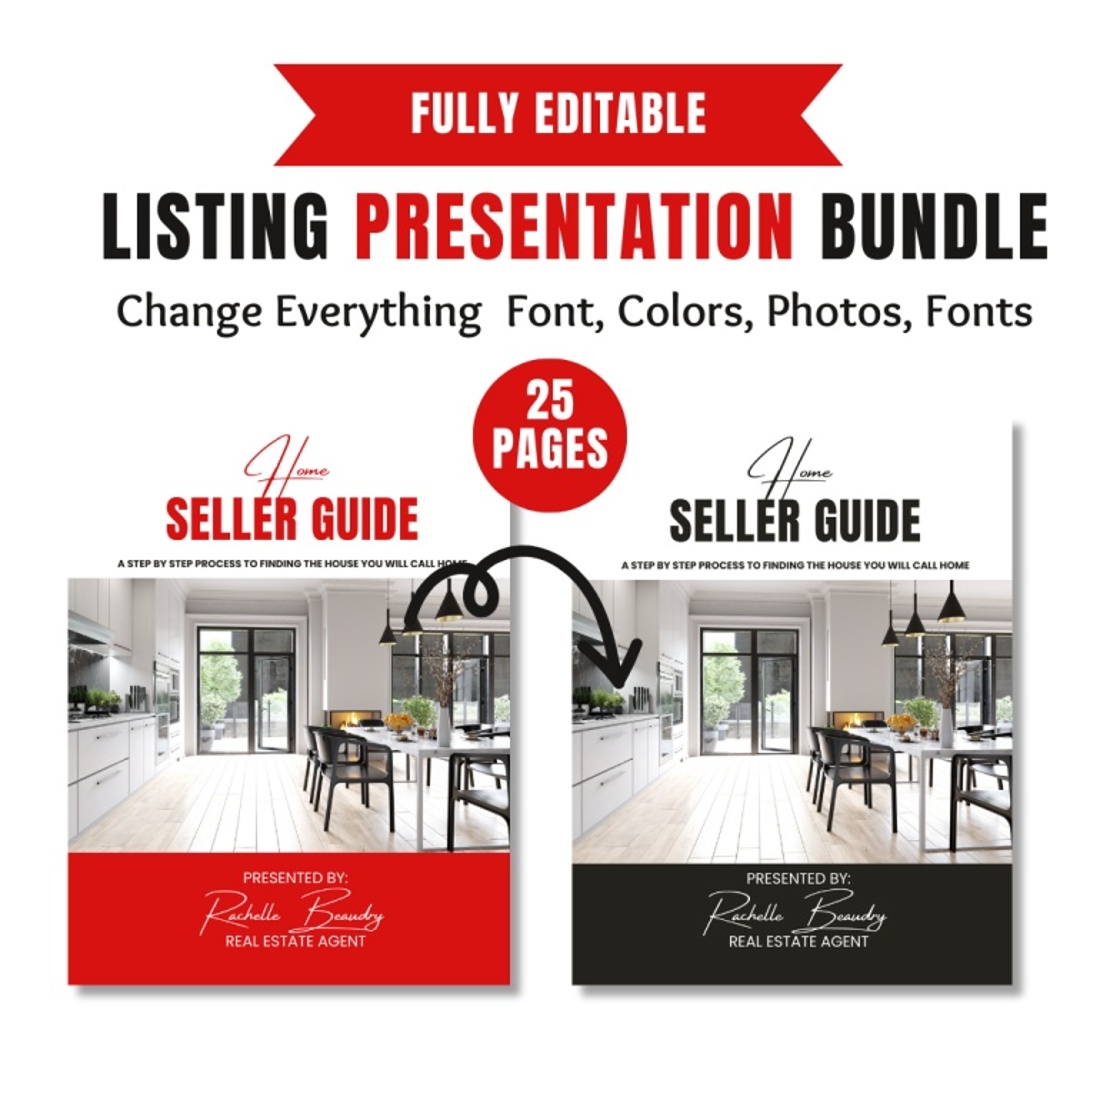 Real Estate Seller Guide & Home Buyer Guide Bundle | Real Estate Marketing | Home Seller Guide | CMA Packet | Listing Presentation | Canva | Fall Presentation canva preview image.